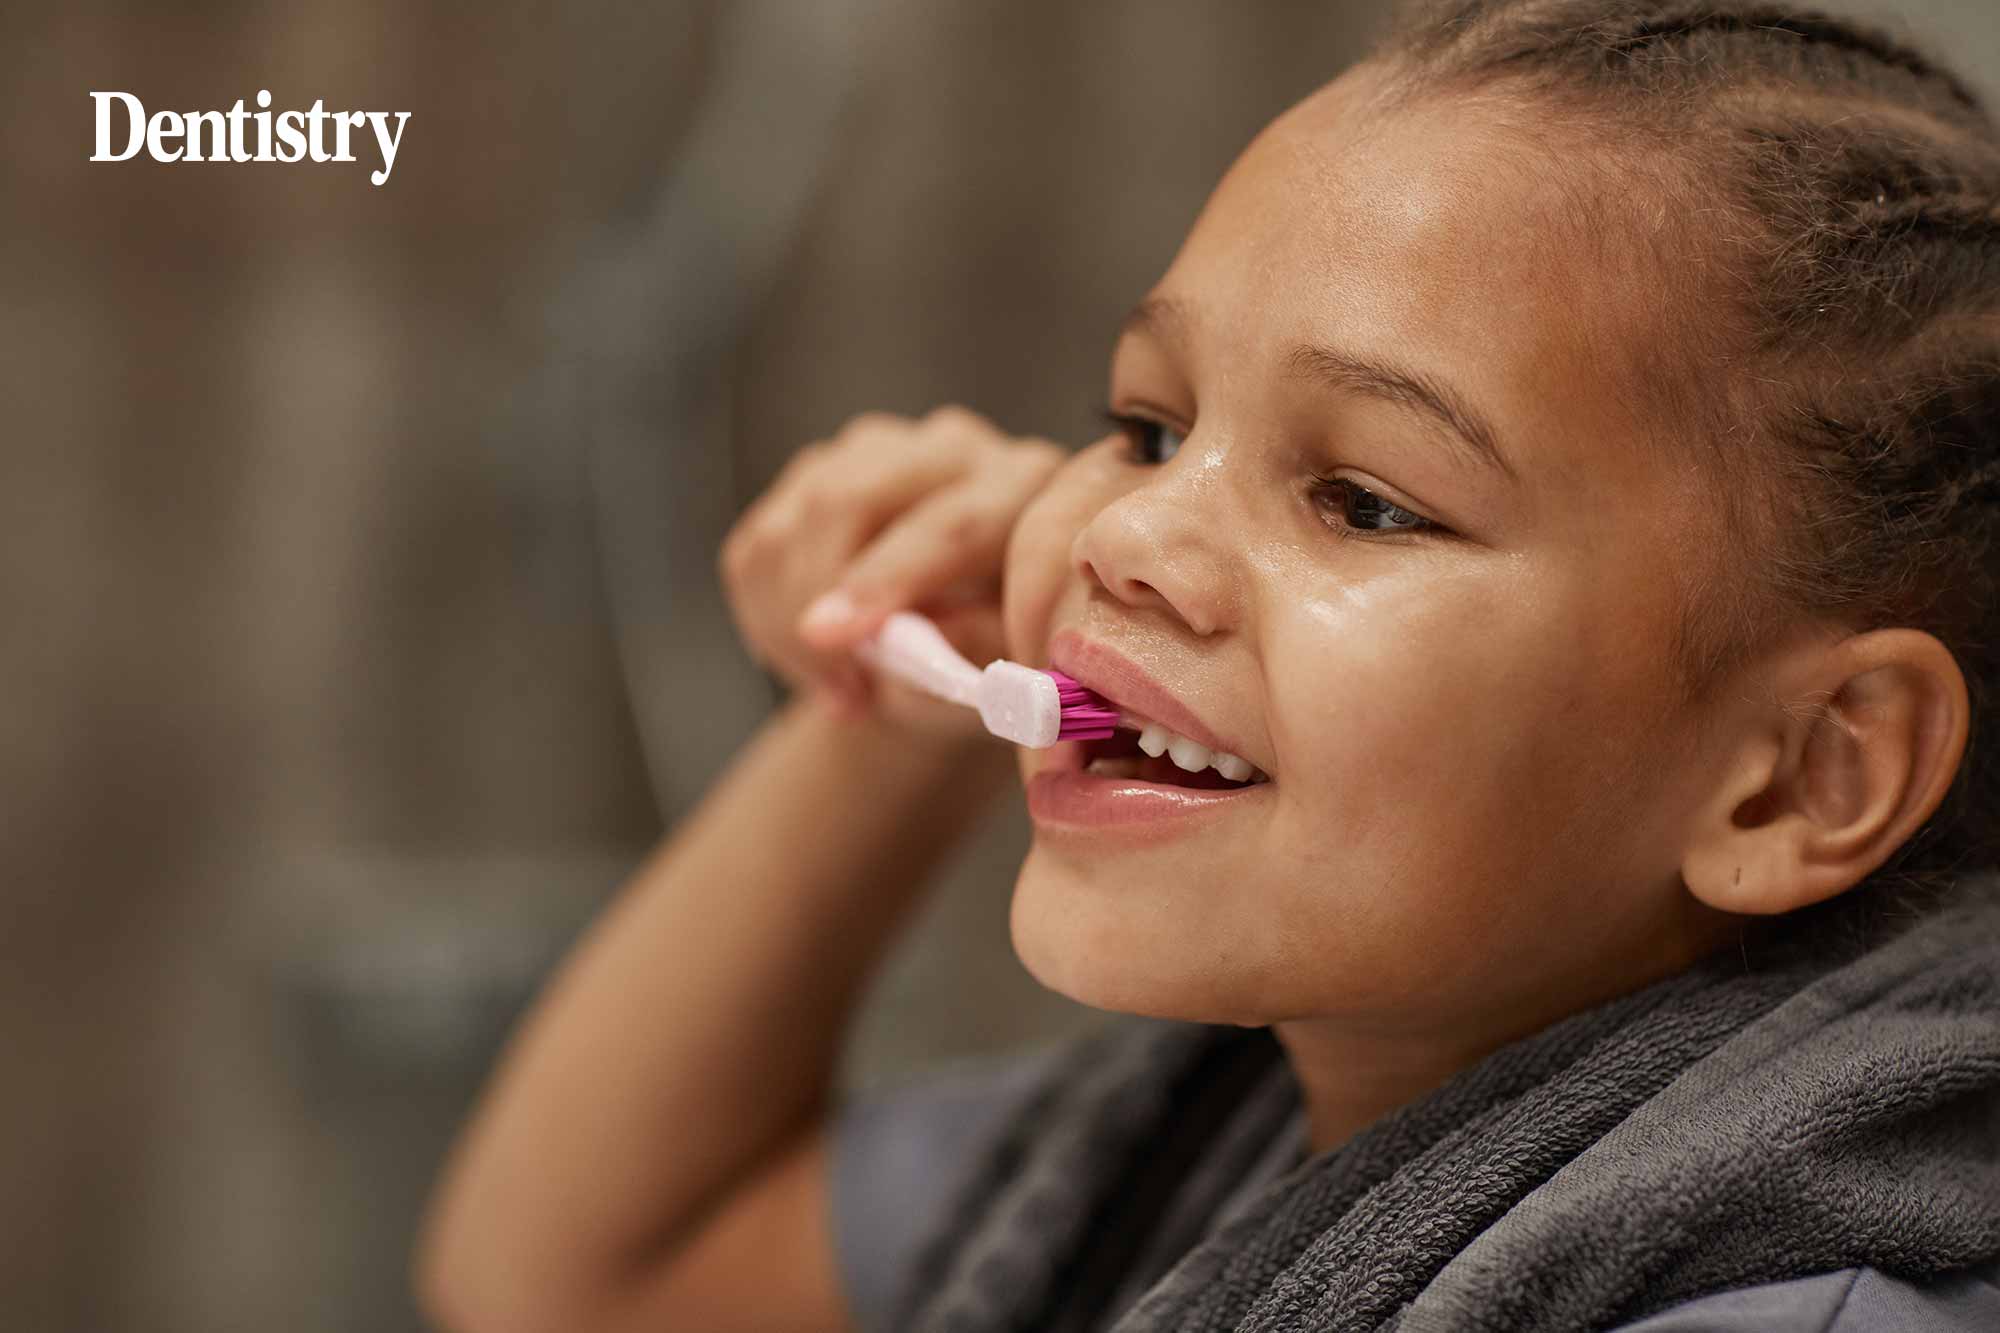 Toothbrushing classes set for schools in Essex and Sussex